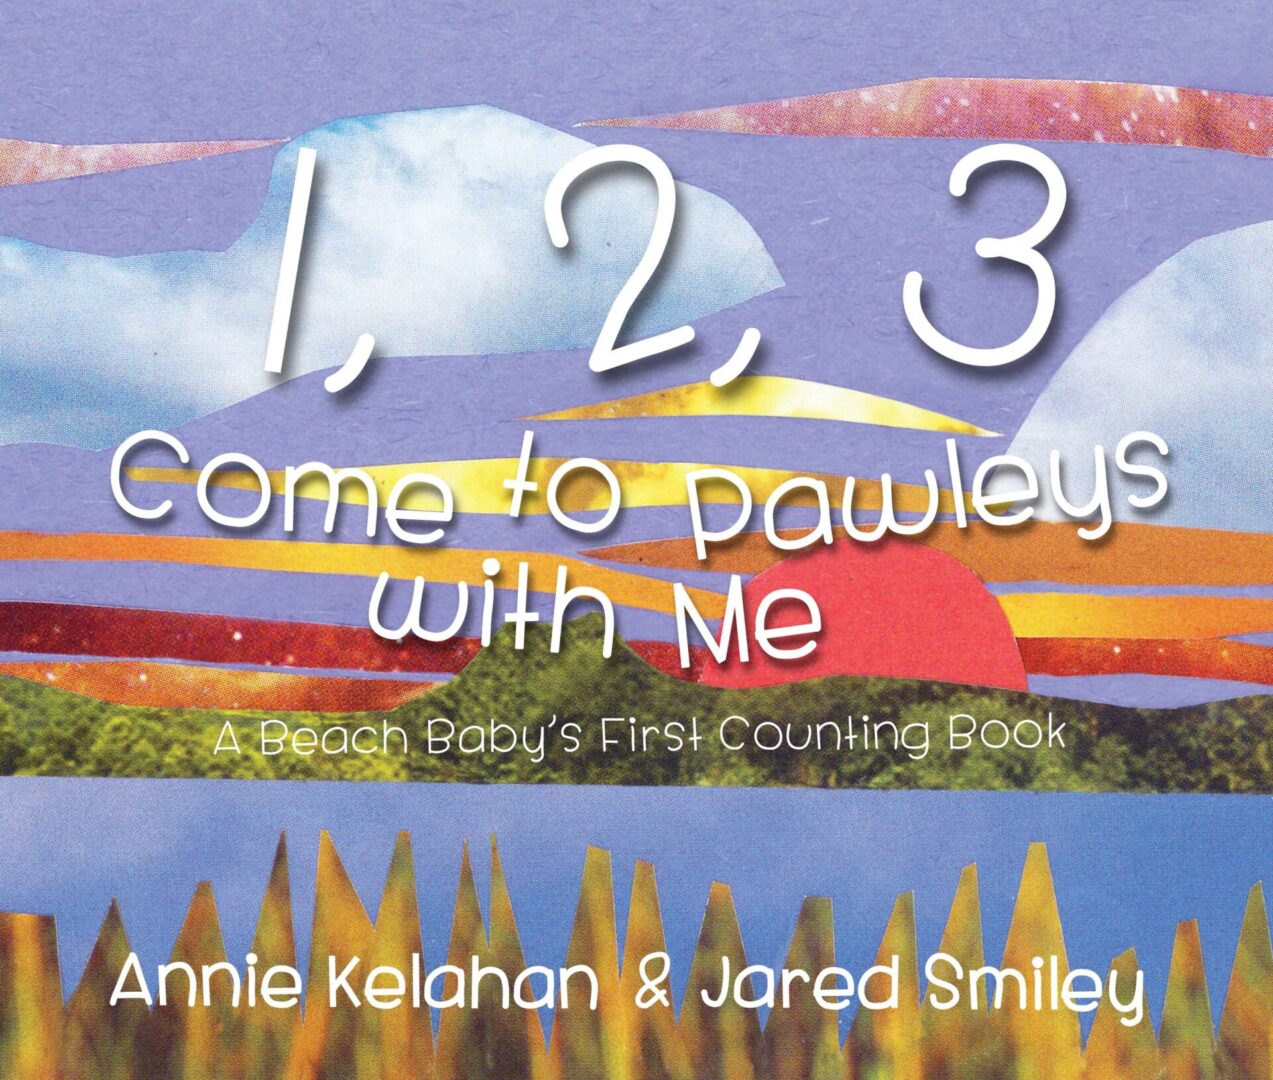 A book cover with the title of " 1, 2, 3 come to pawleys with me ".